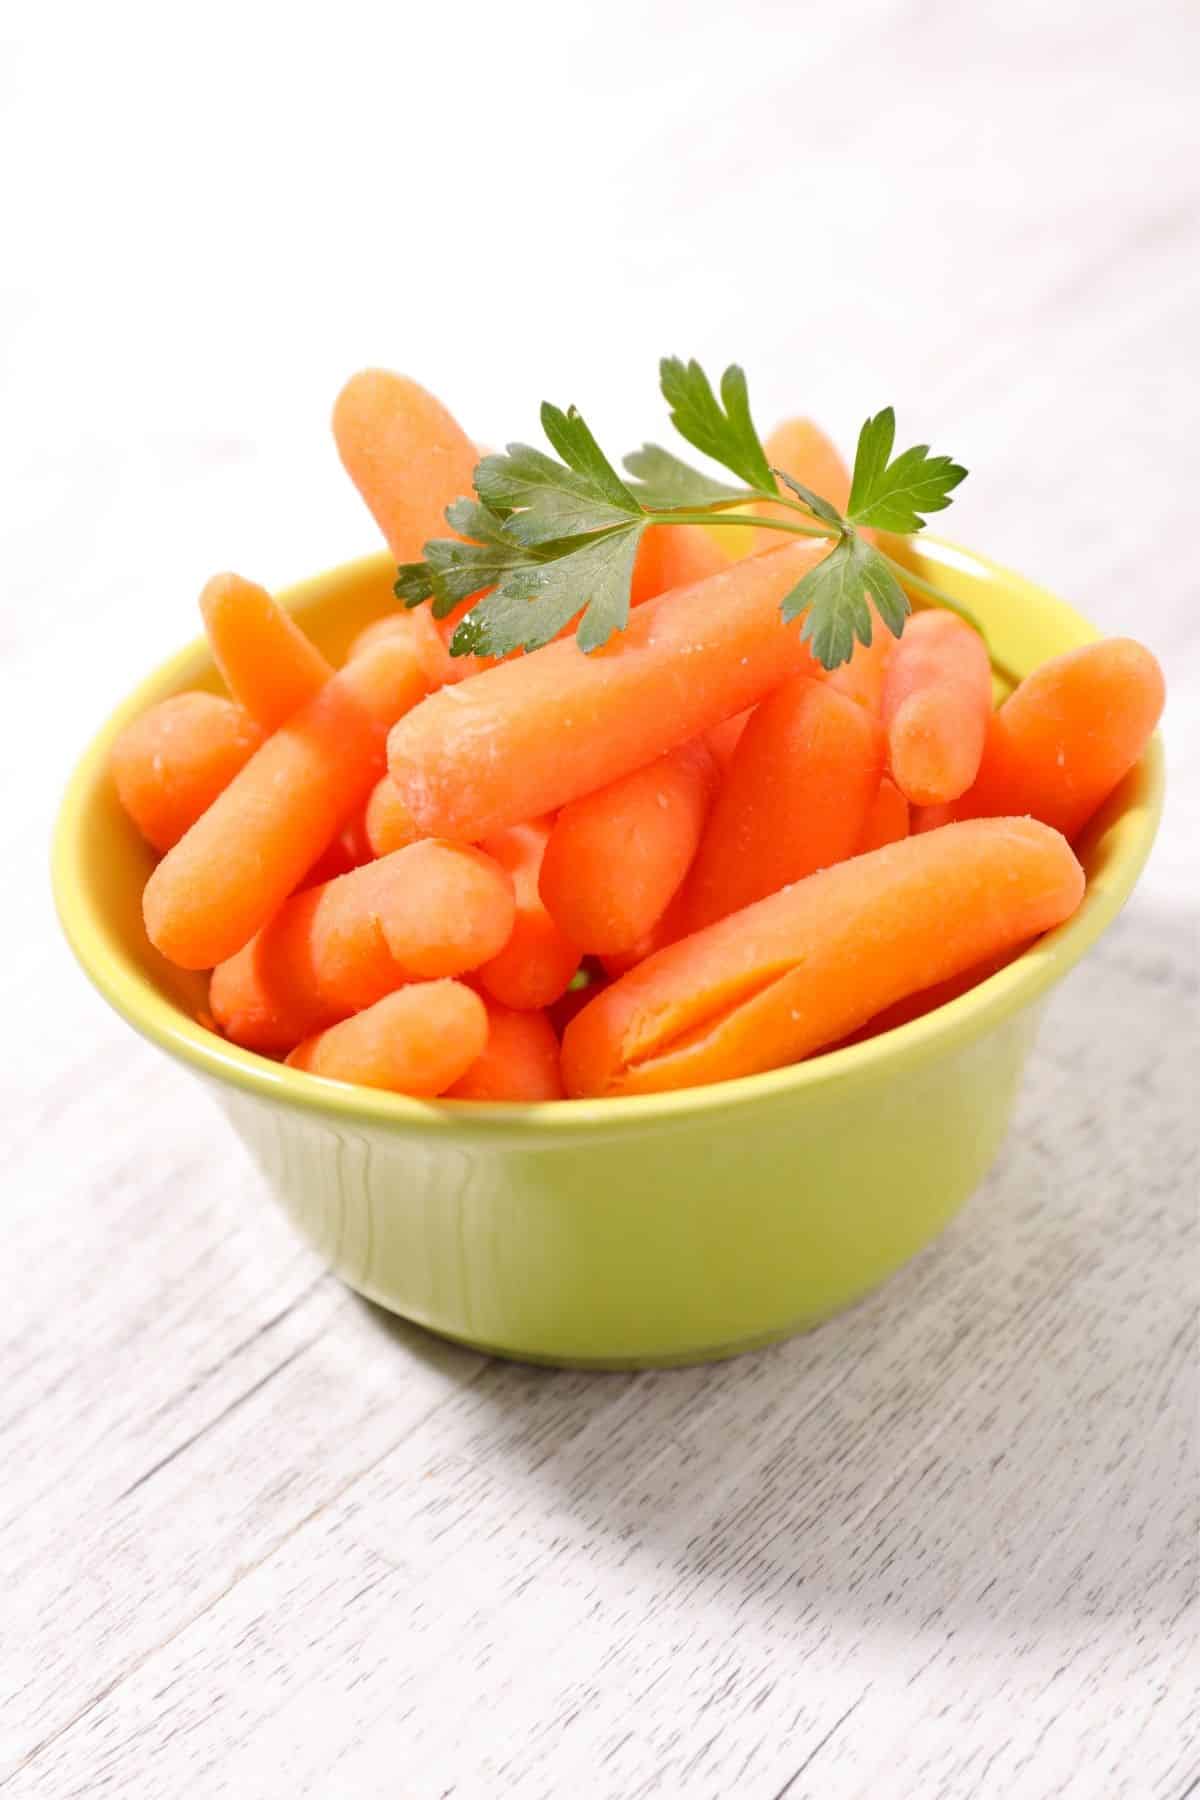 Baby carrots in a small yellow bowl with a sprig of parsley.